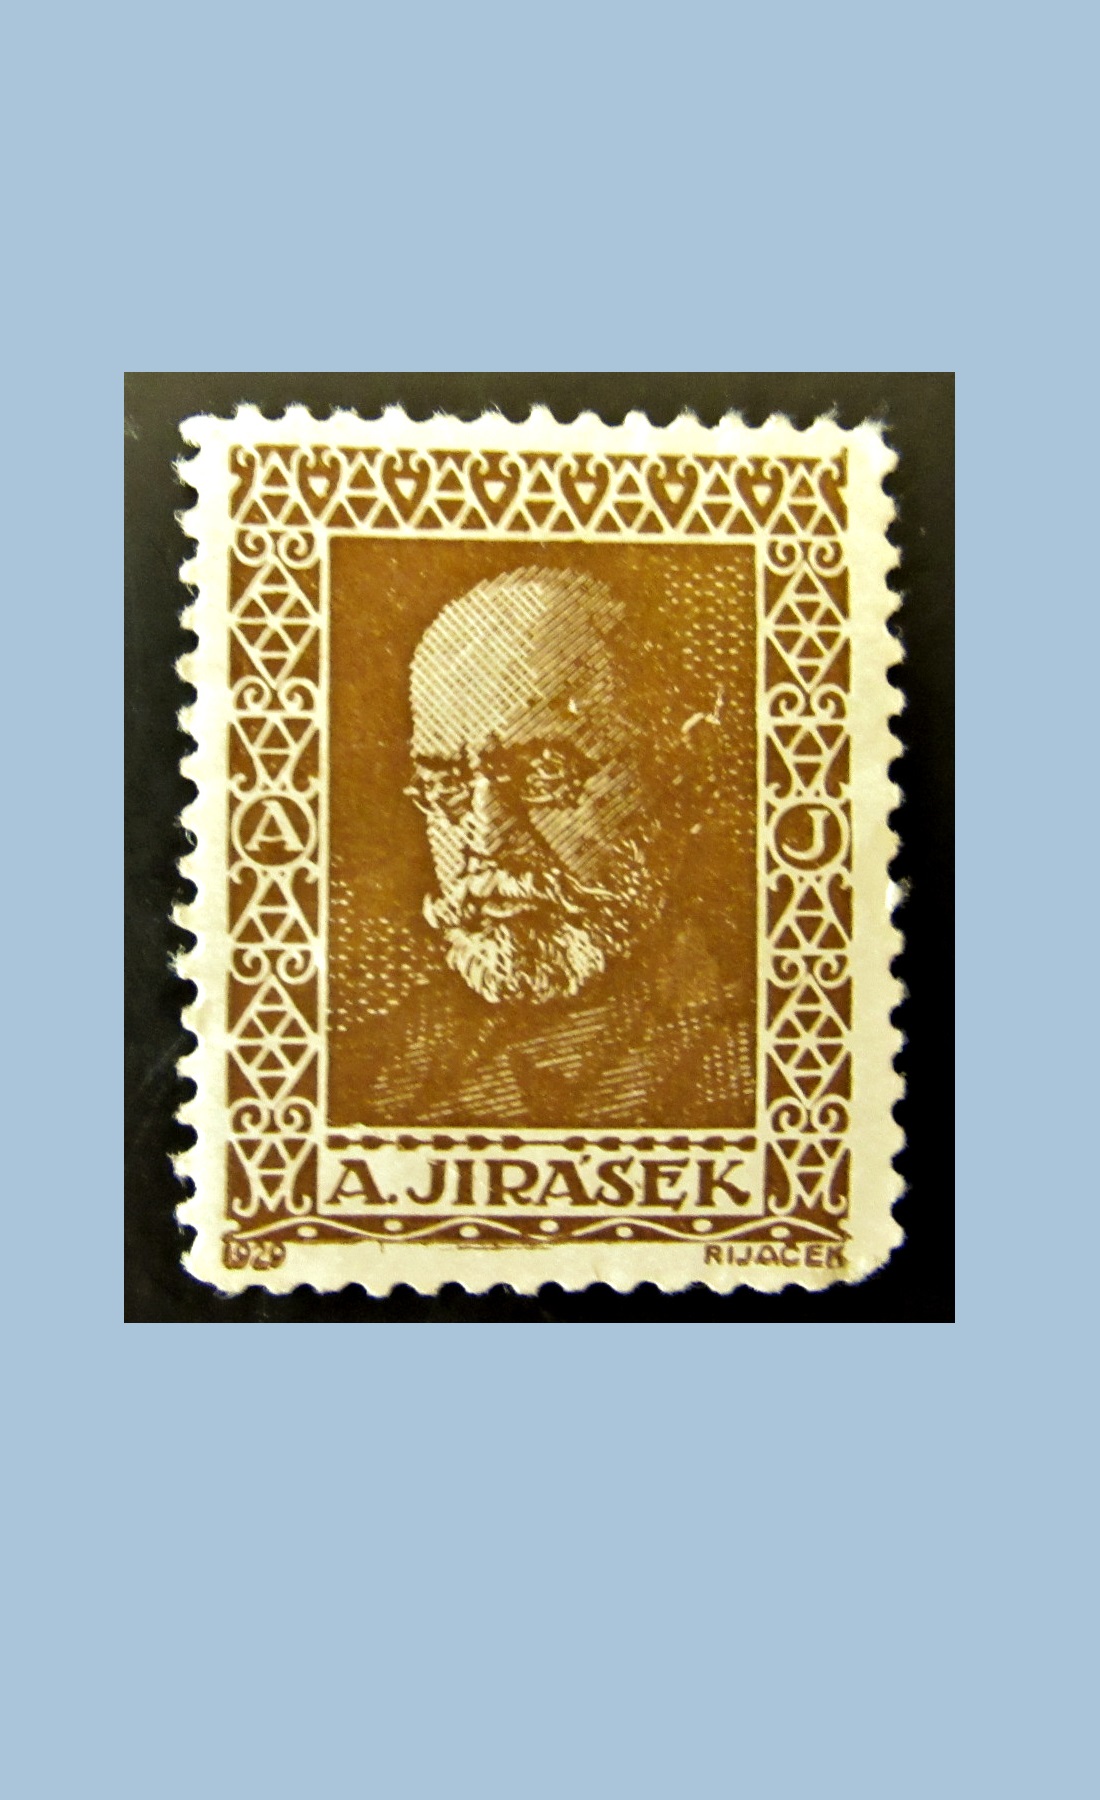 Rare Postage Stamp Without Nominal Value, Unused.